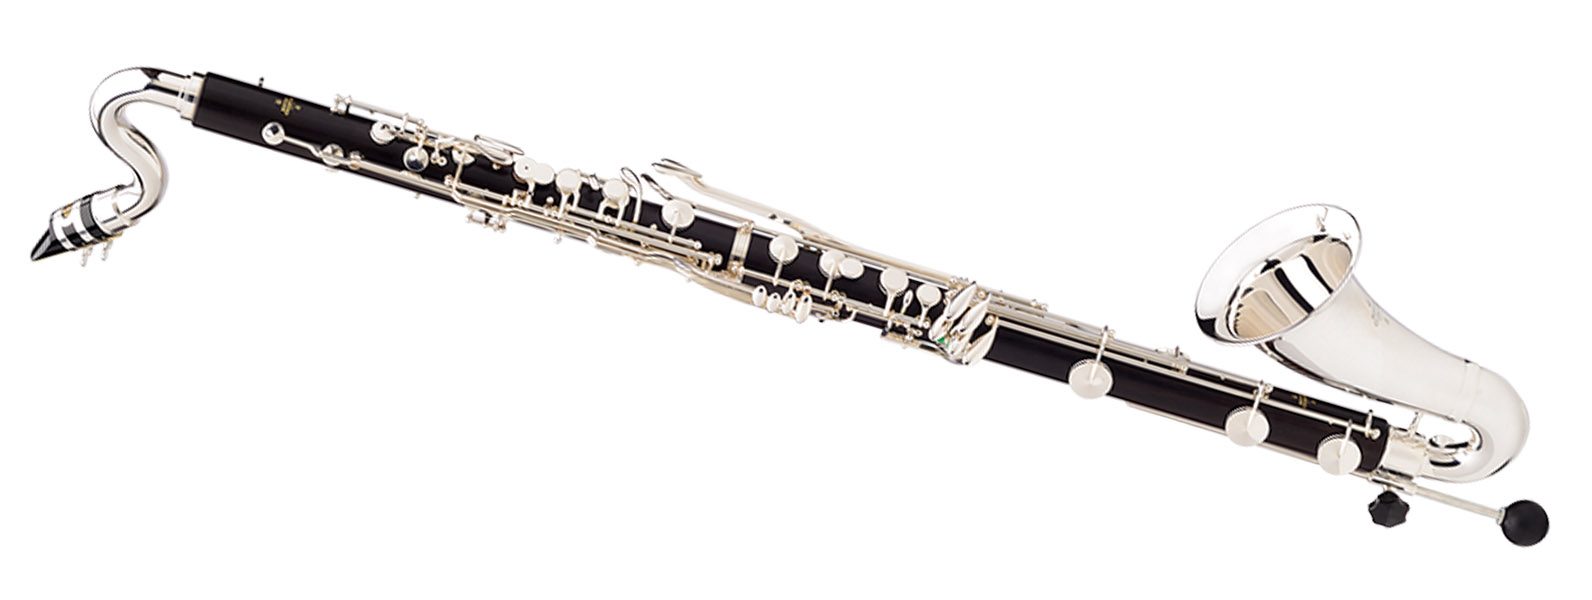 buffet clarinet review